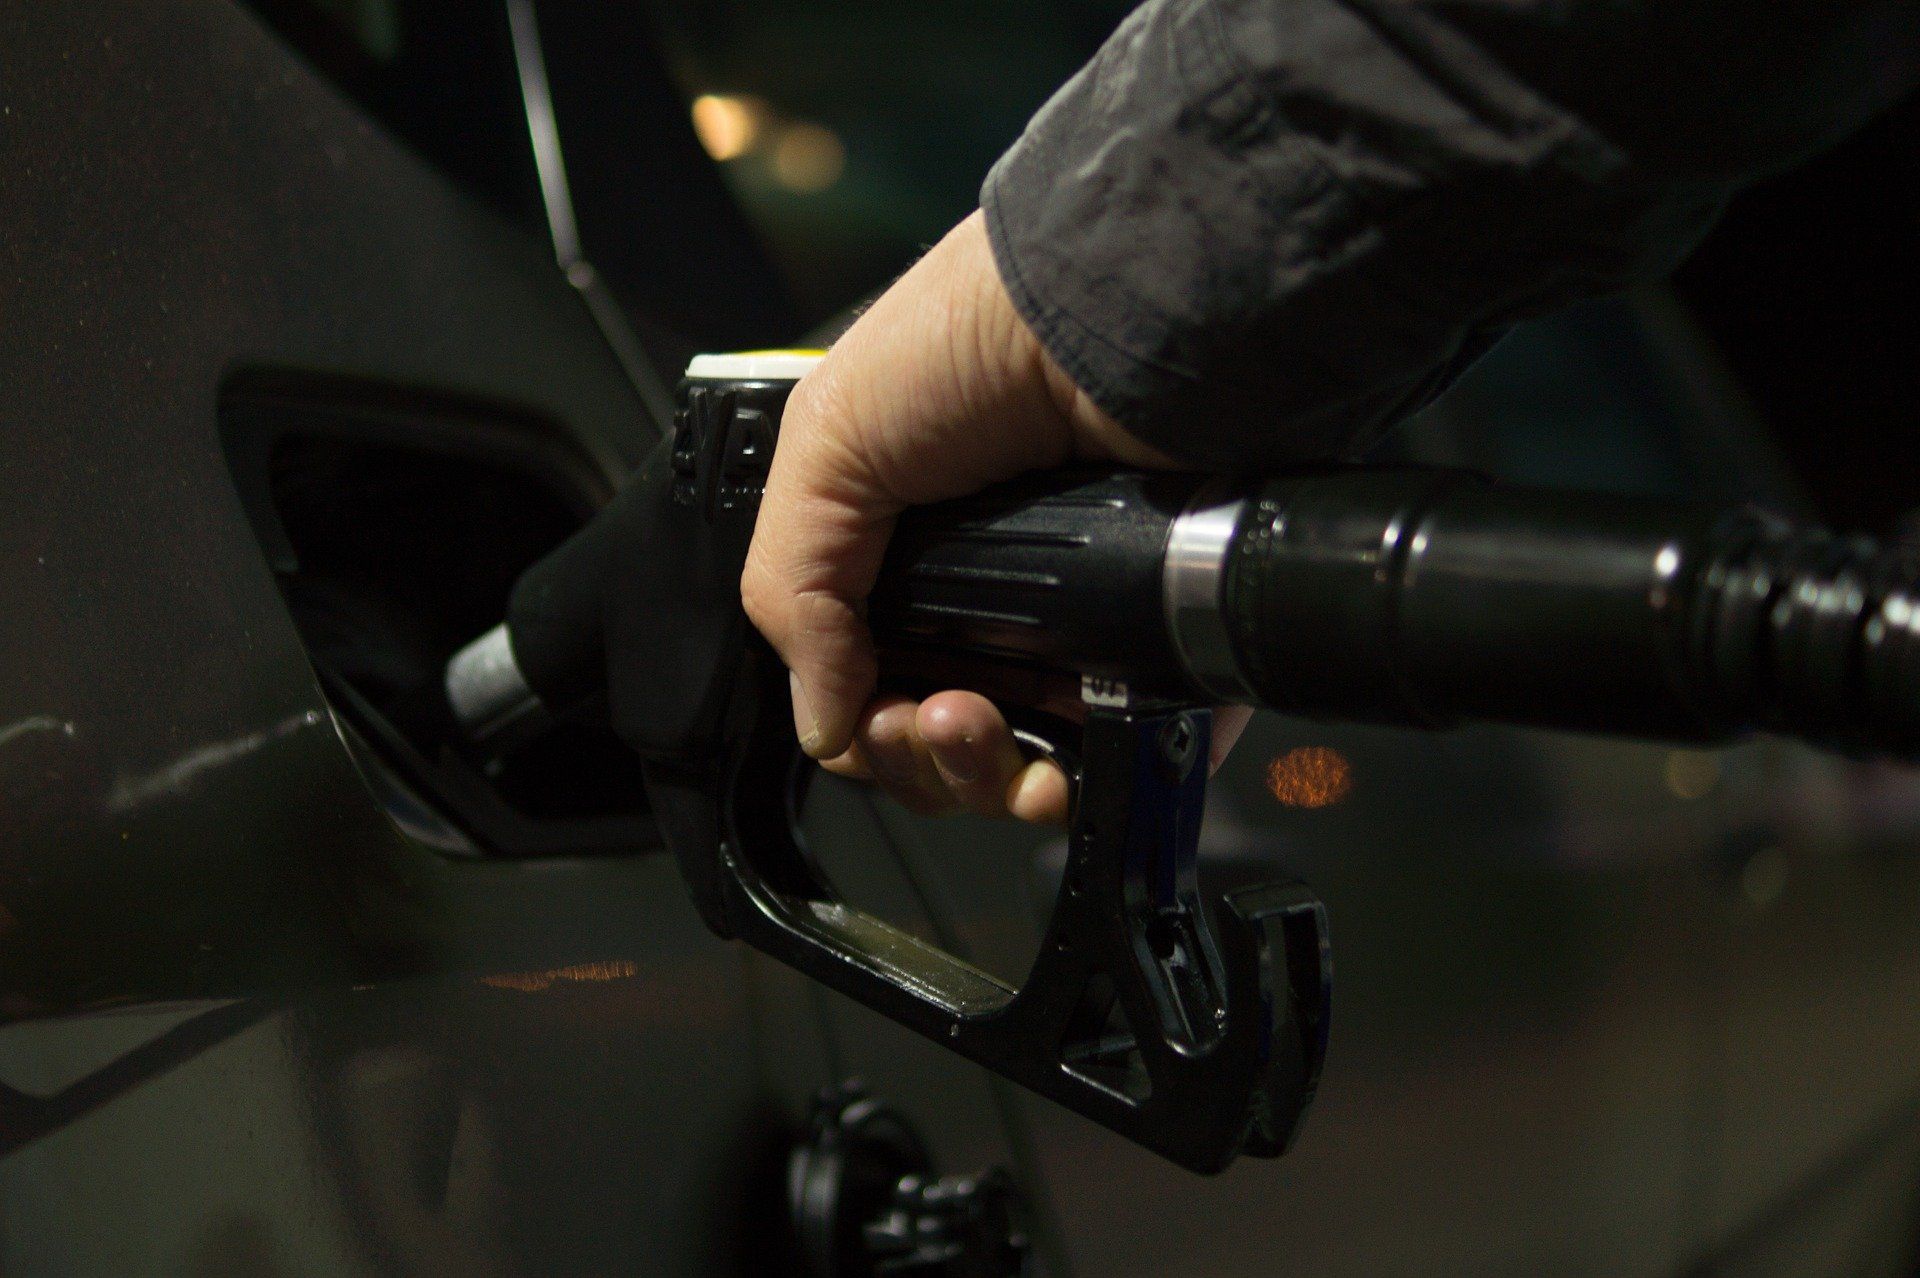 Fuel prices hike: Petrol and Diesel rates increased by 80 paise on March 31, 2022